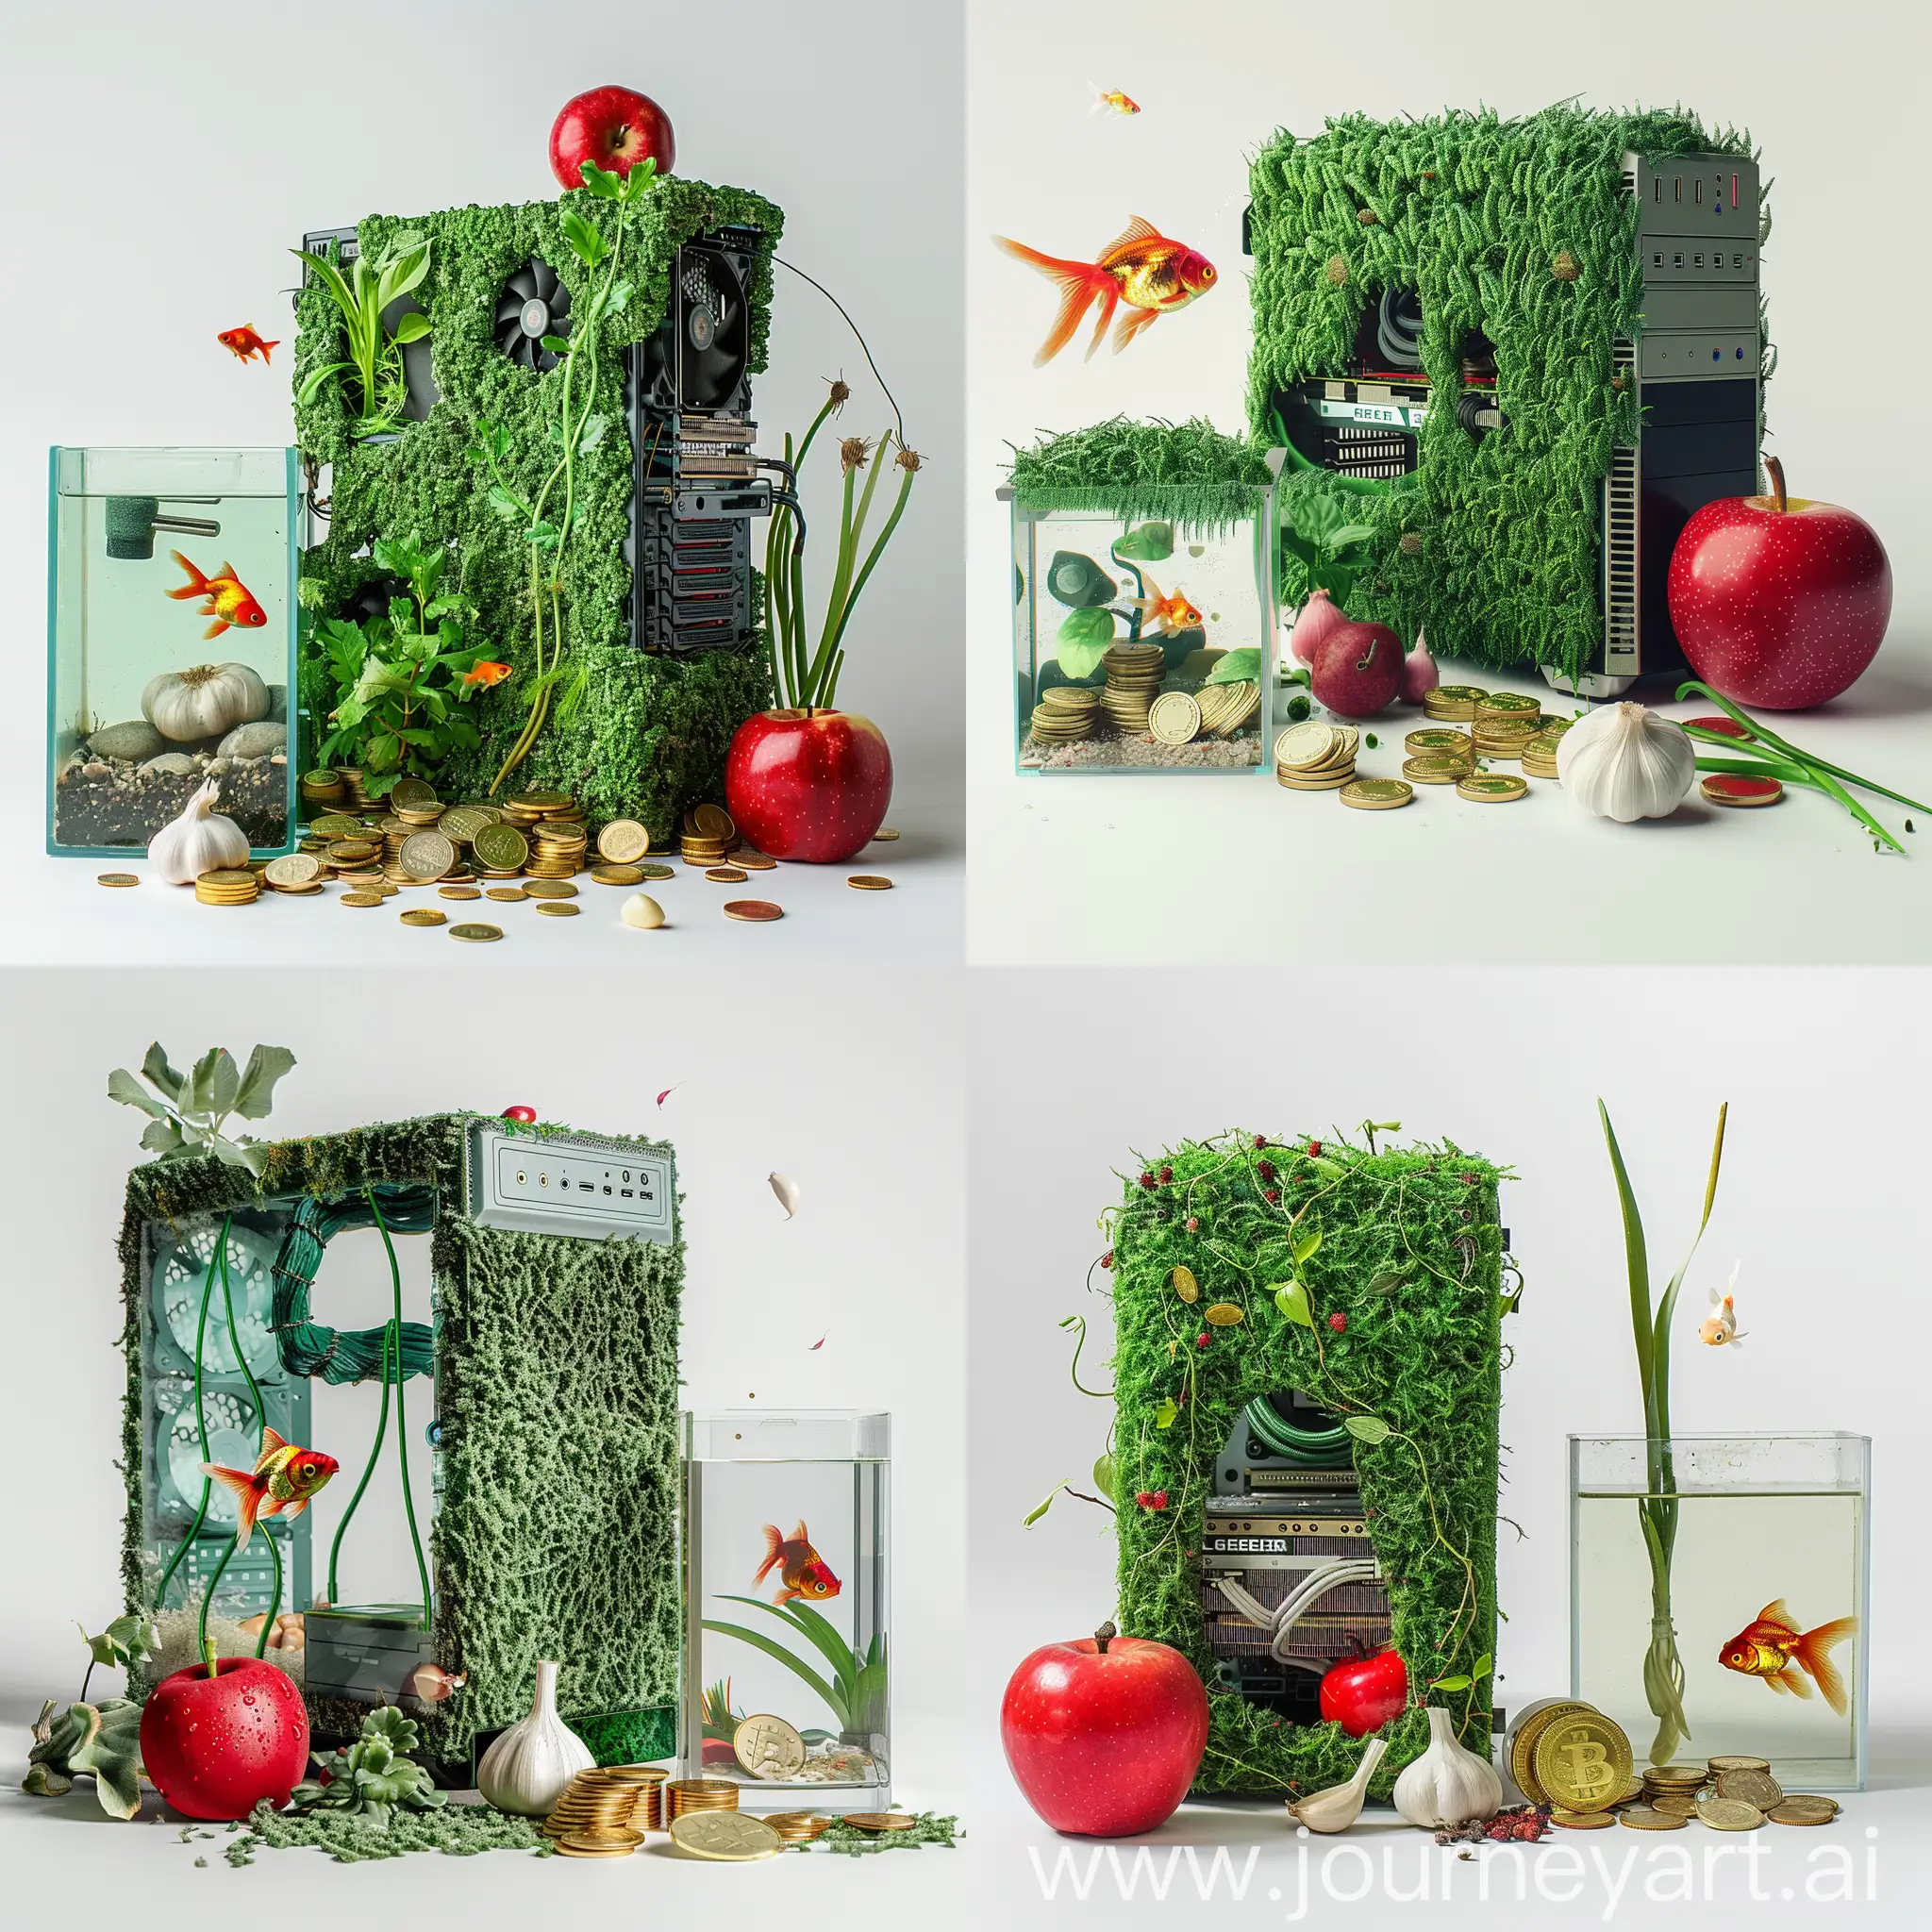 Make a picture of a computer case that is grown like grass and green, and next to it there is a red apple, garlic, gold coins, and a fish tank with a small goldfish swimming in the tank. The background of the photo should be white.